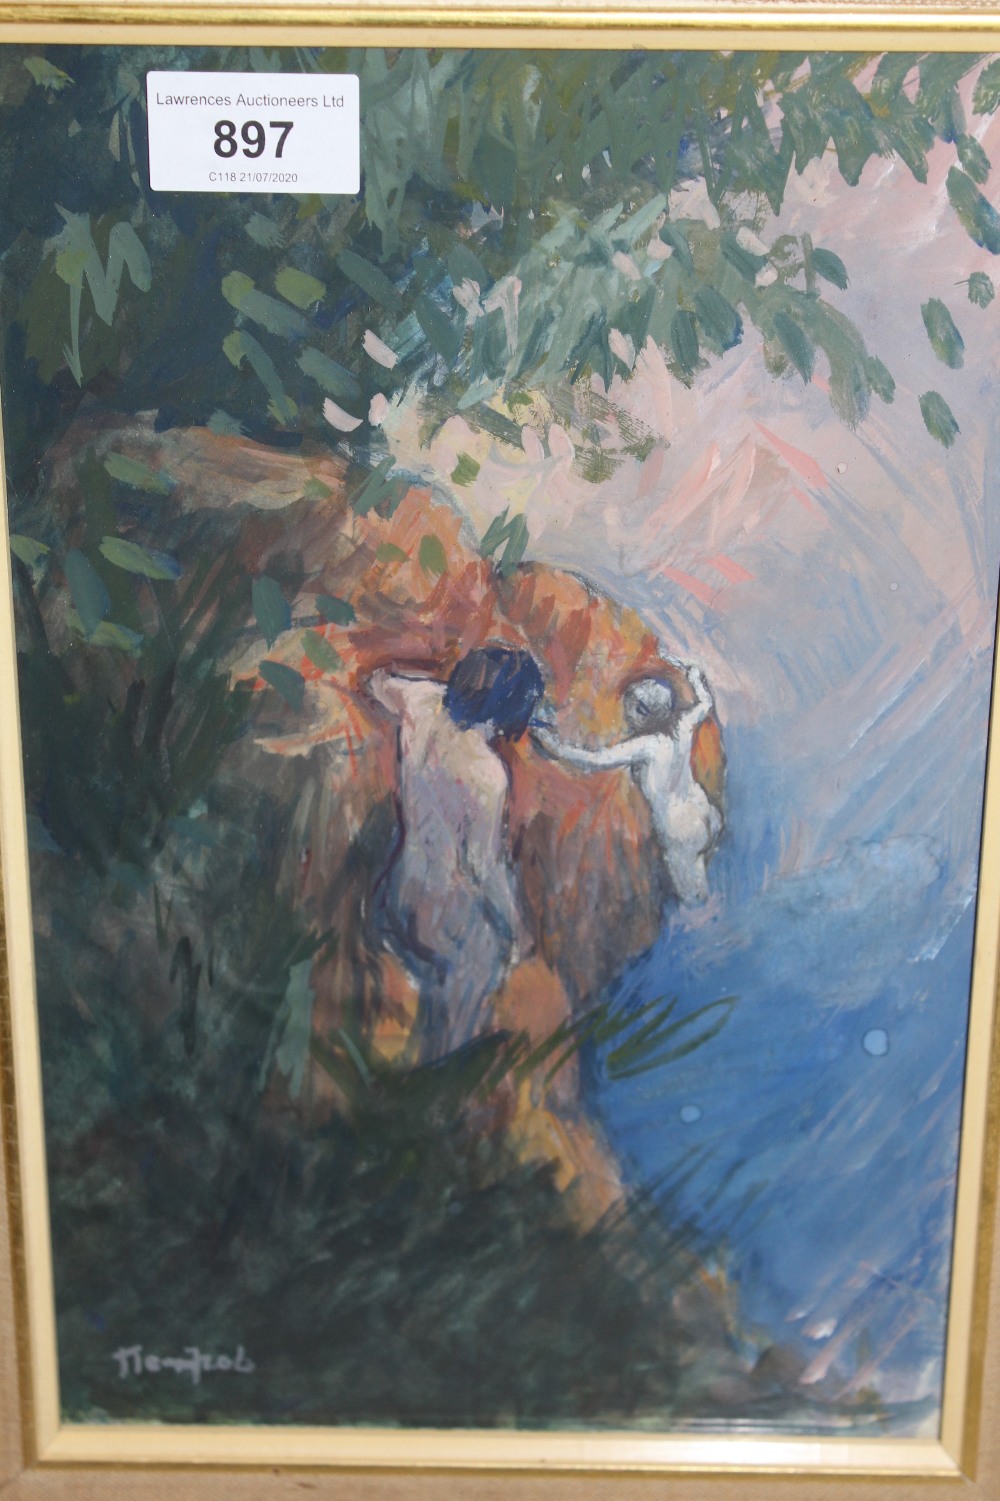 Russian school gouache painting, female bathers by a wooded lake, indistinctly signed, 11.5ins x 7.